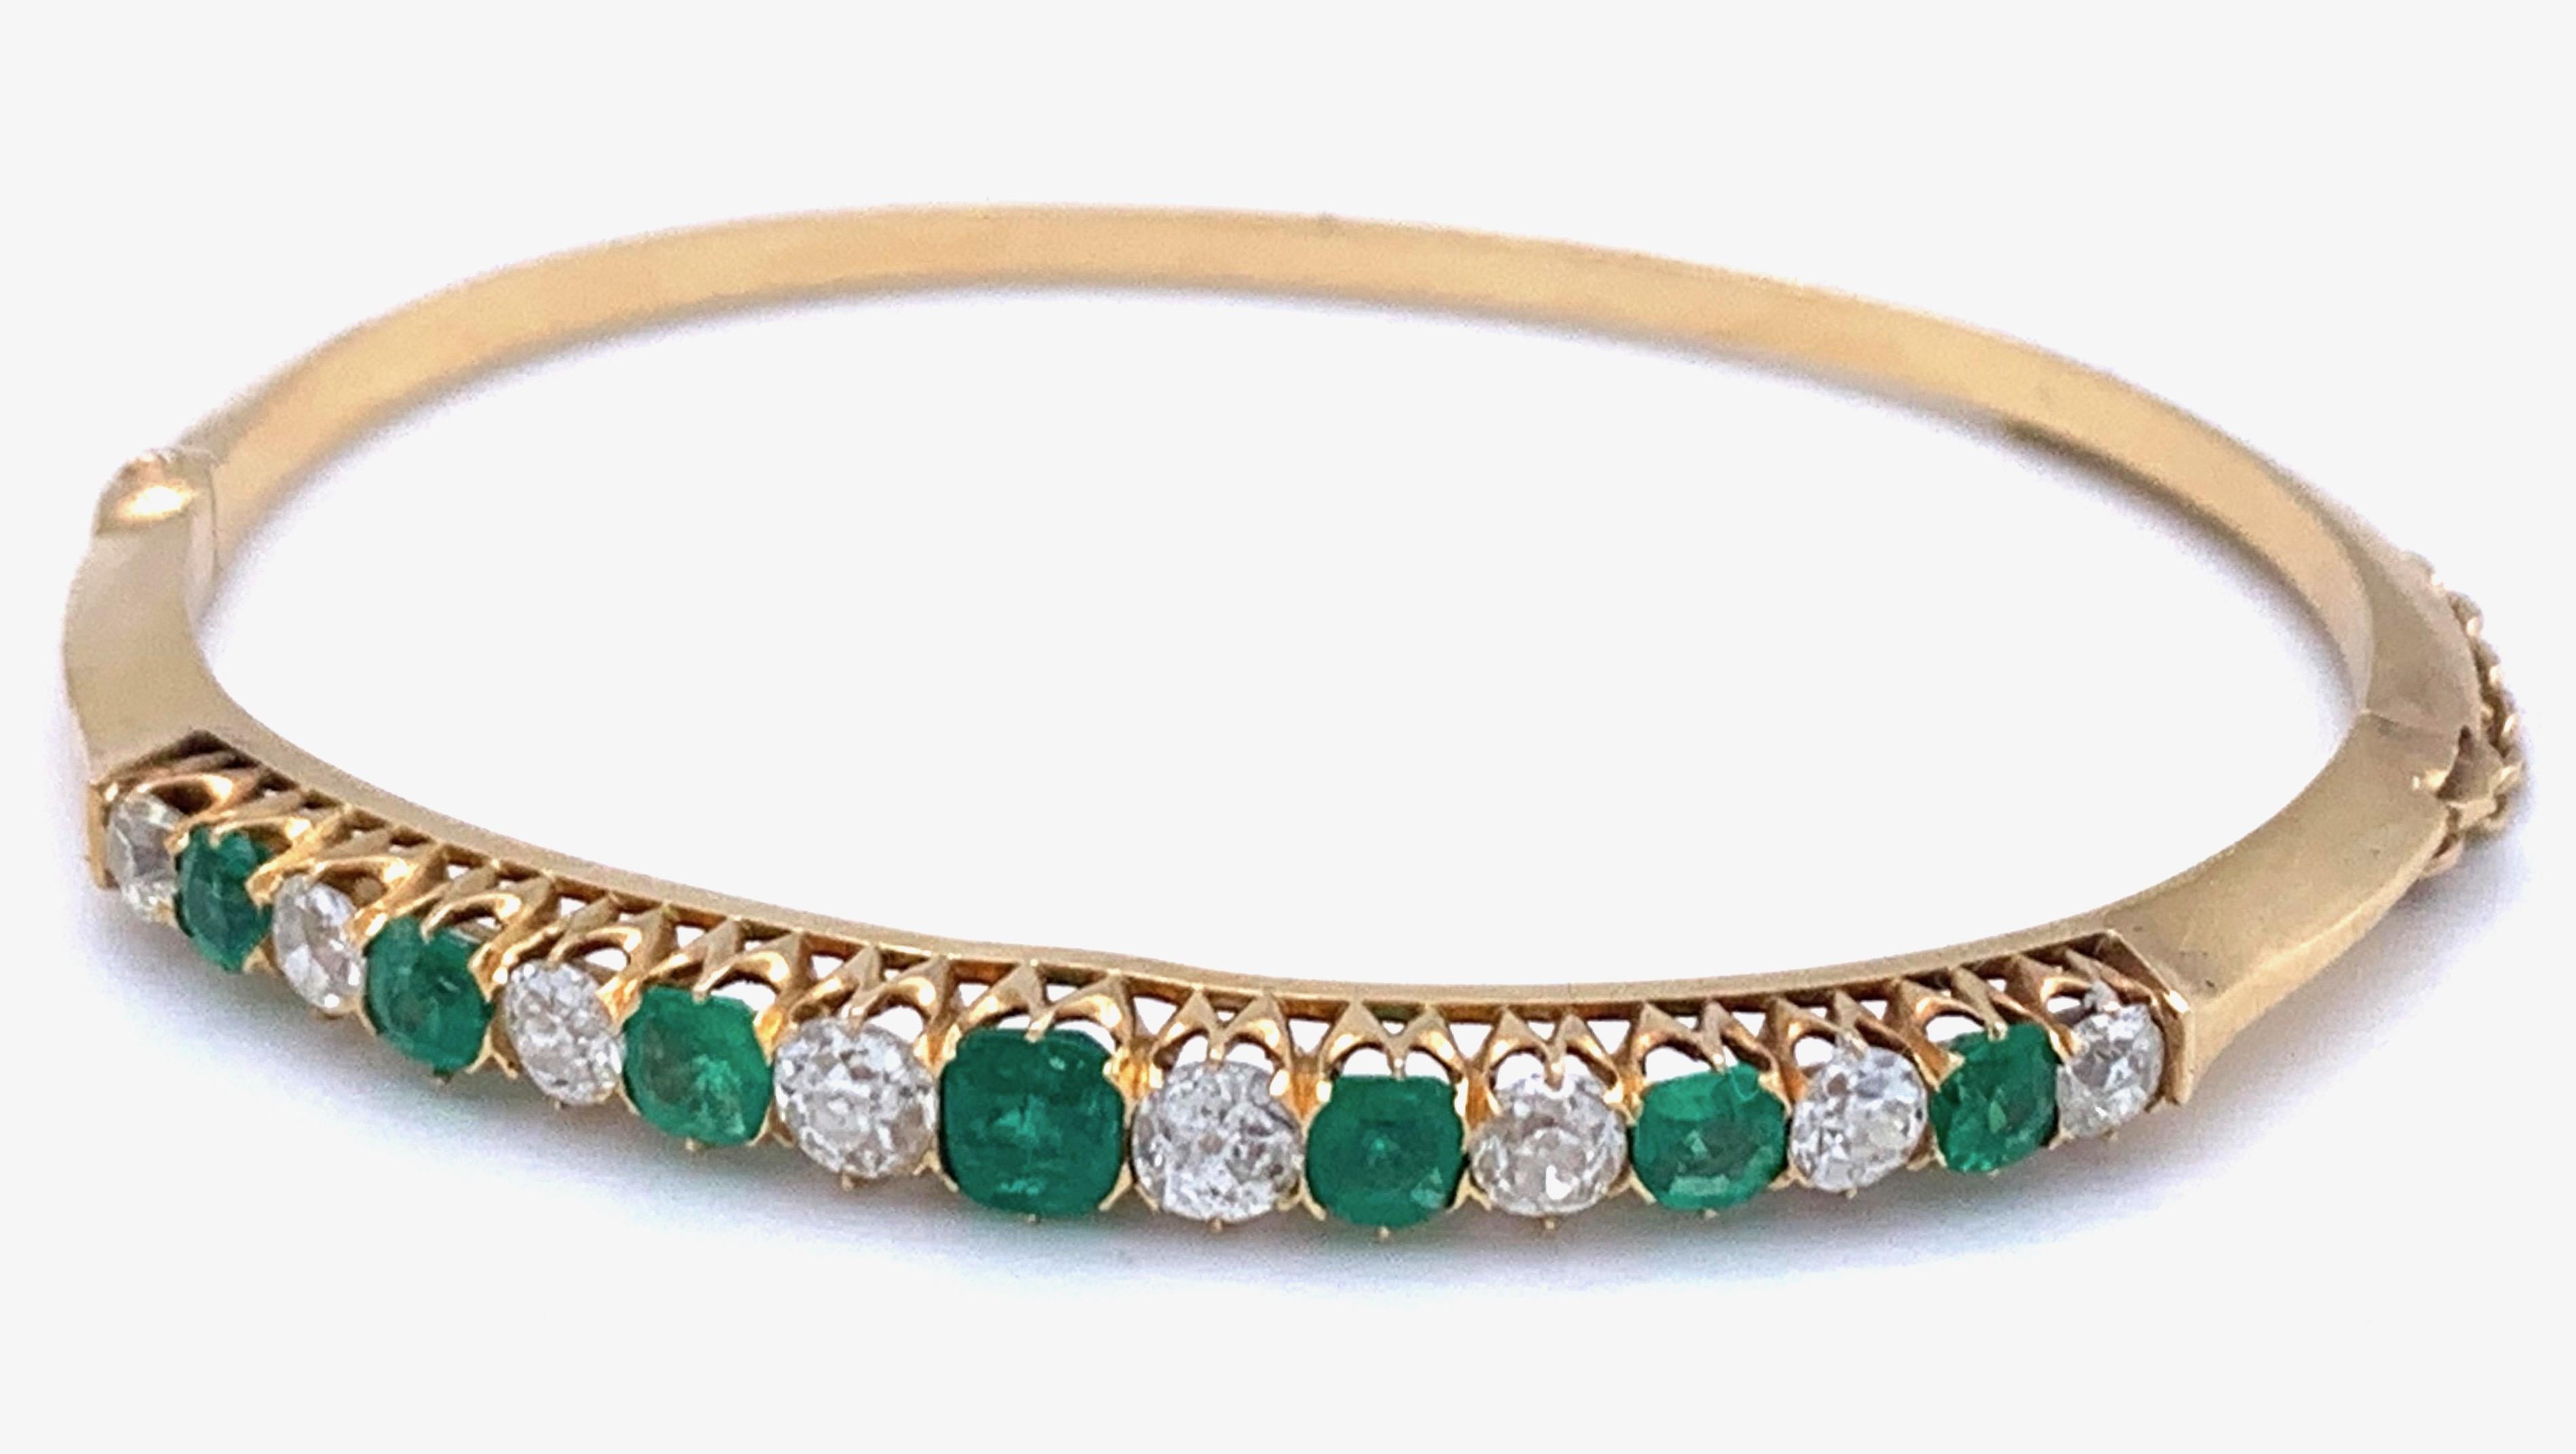 The bracelet is set with eight old cut diamonds (1,5 ct in total) as well as seven emeralds (1,4 ct in total), and is made of 18K red gold. The clasp is made out of 14 kt gold.

